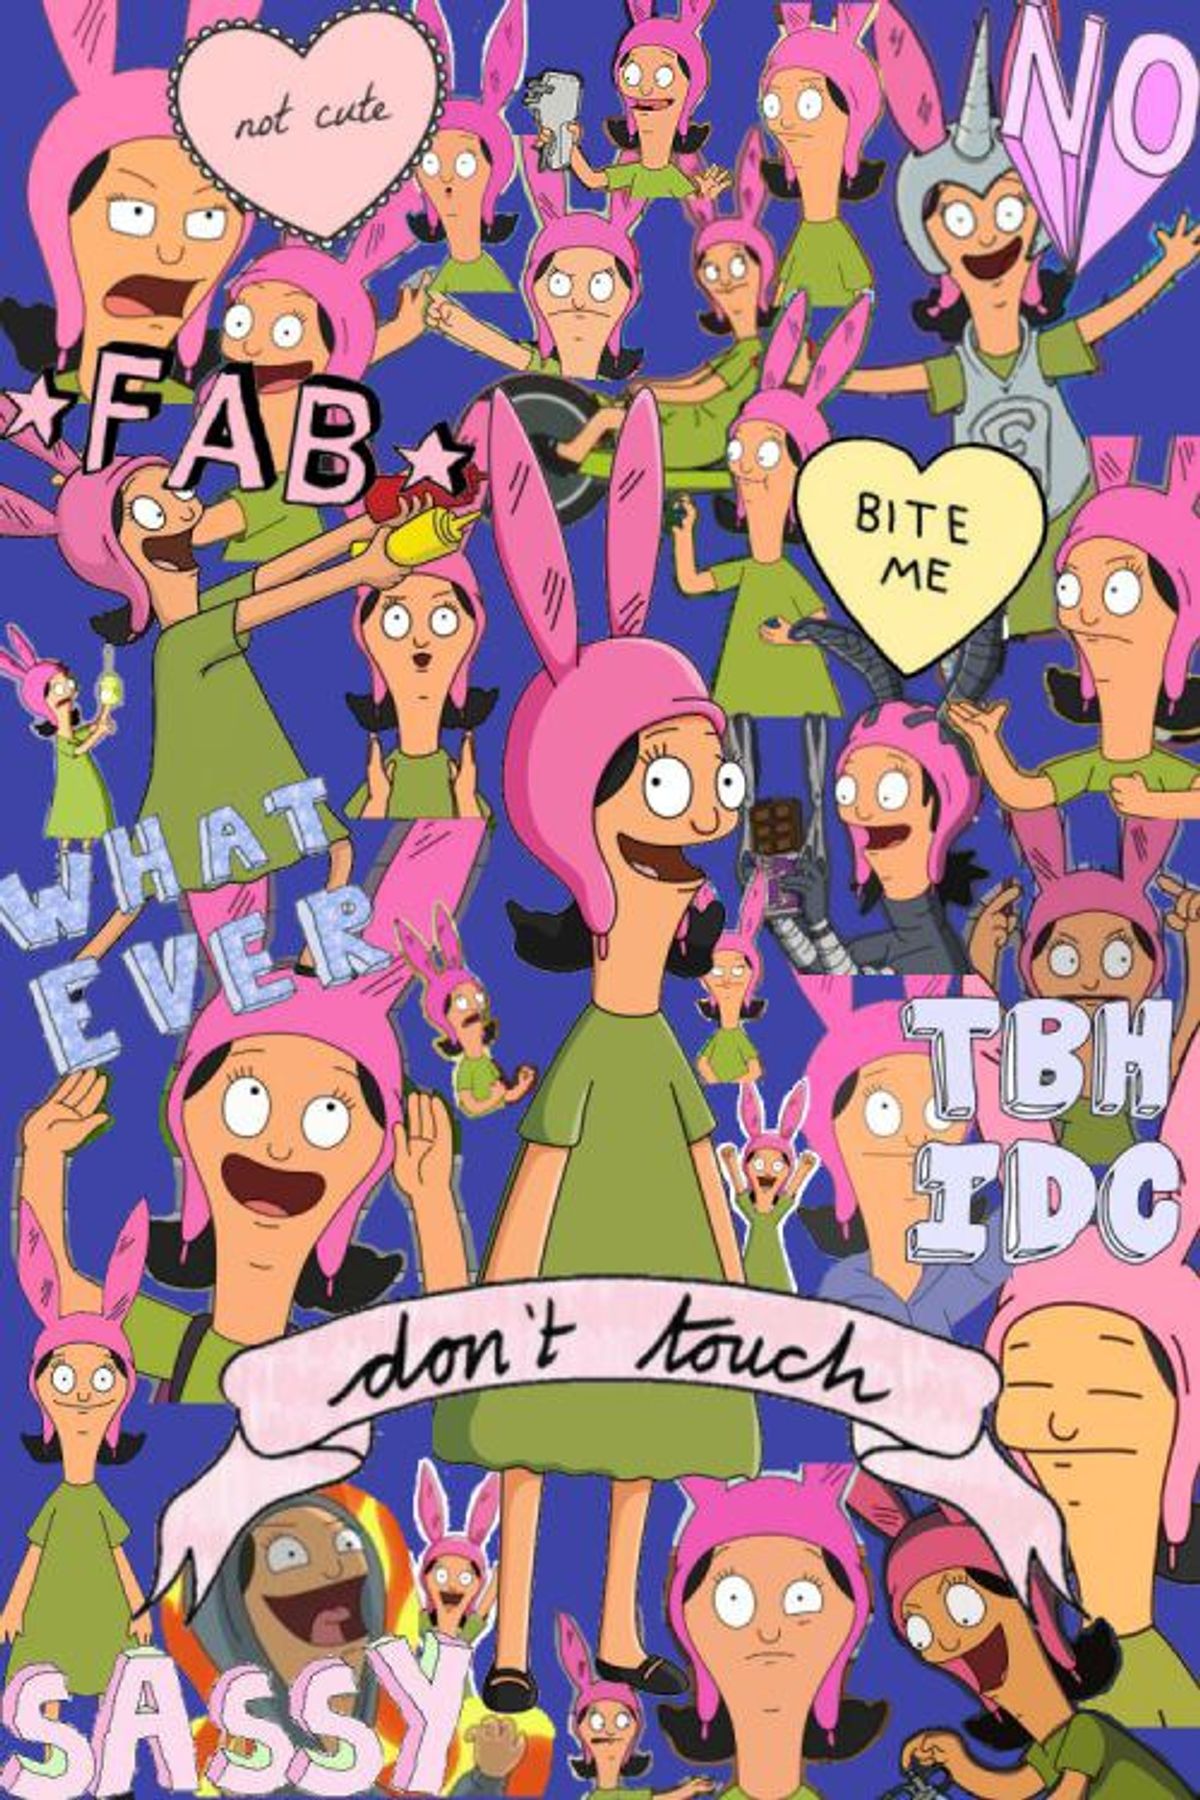 14 Reasons why I am Louise Belcher